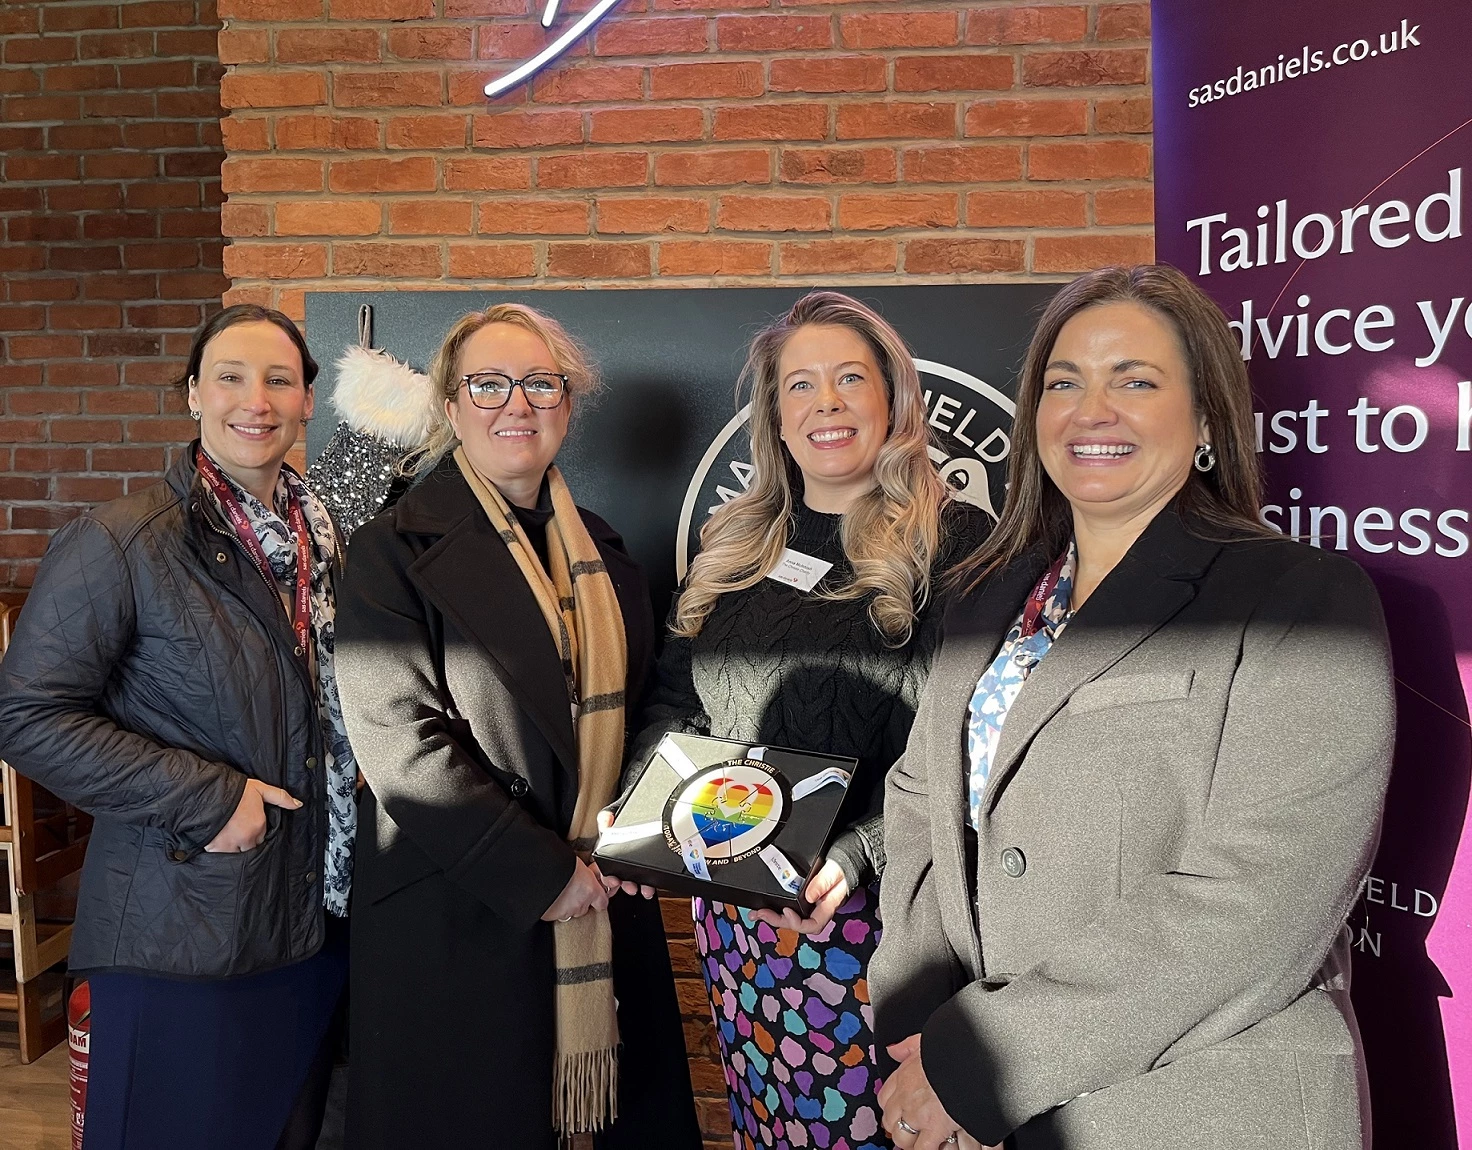 L-R: Cheryl Haywood, Senior Associate, Jo Unwin, Senior Associate and Operations Manager - Residential Conveyancing, Anna McIntosh from The Christie, and Justine Clowes, Partner and Head of the Private Client Team and the Macclesfield Office